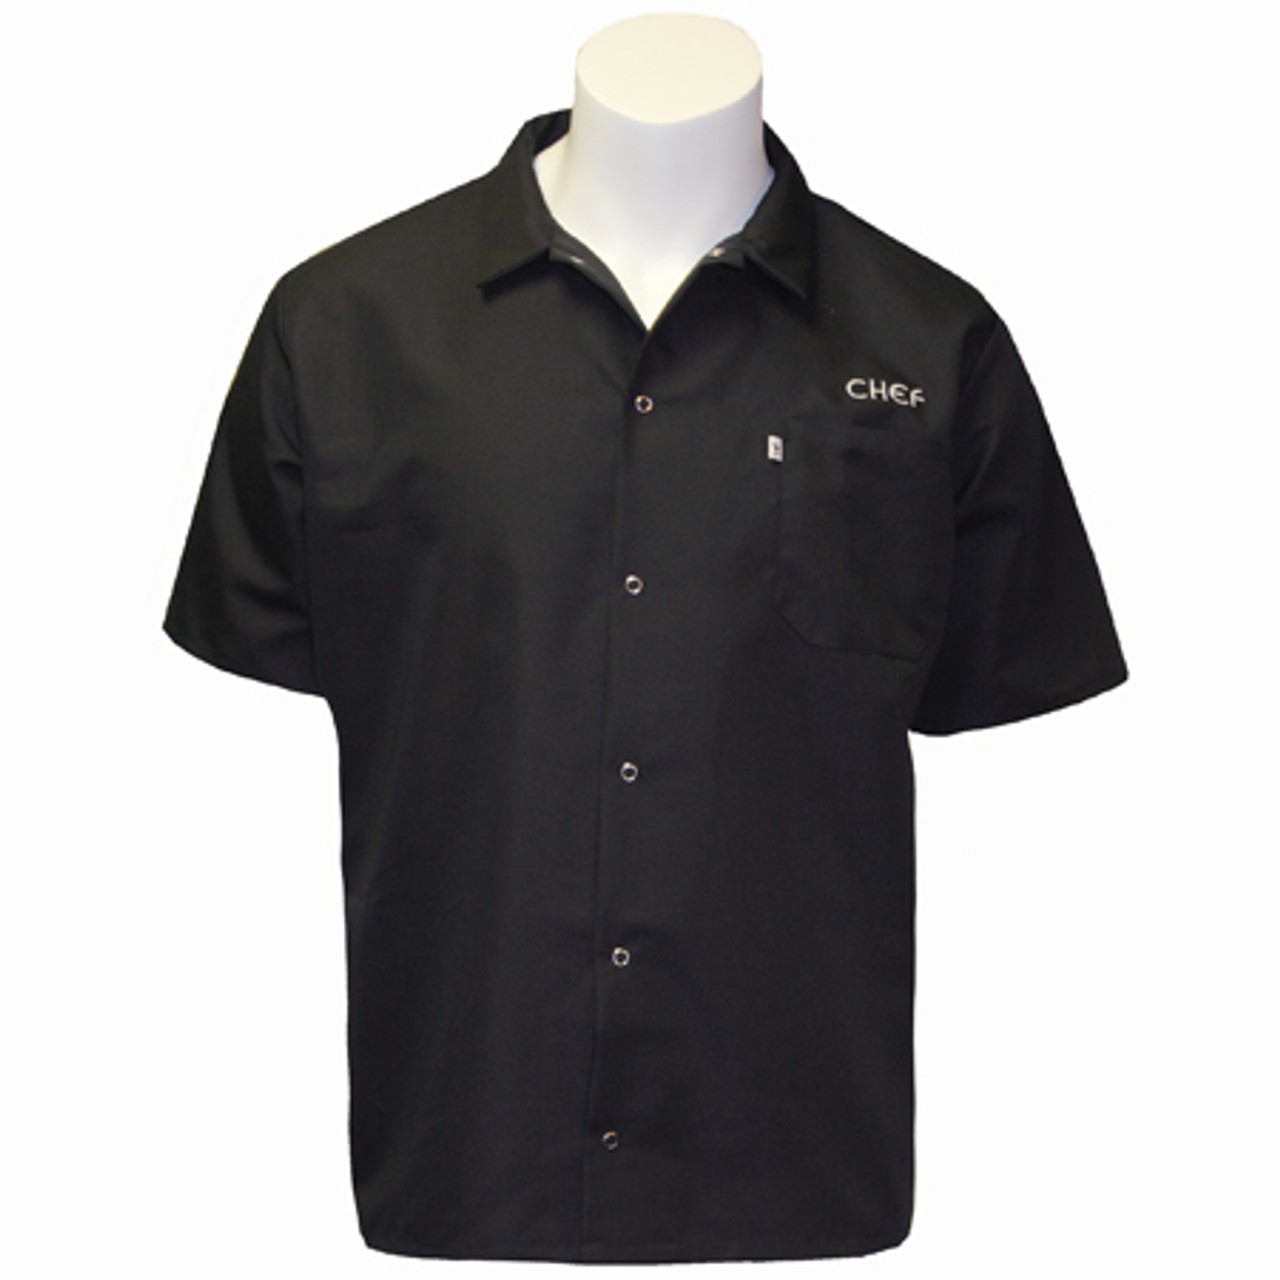 Cook Shirt with CHEF Embroidery in Black - Culinary Classics